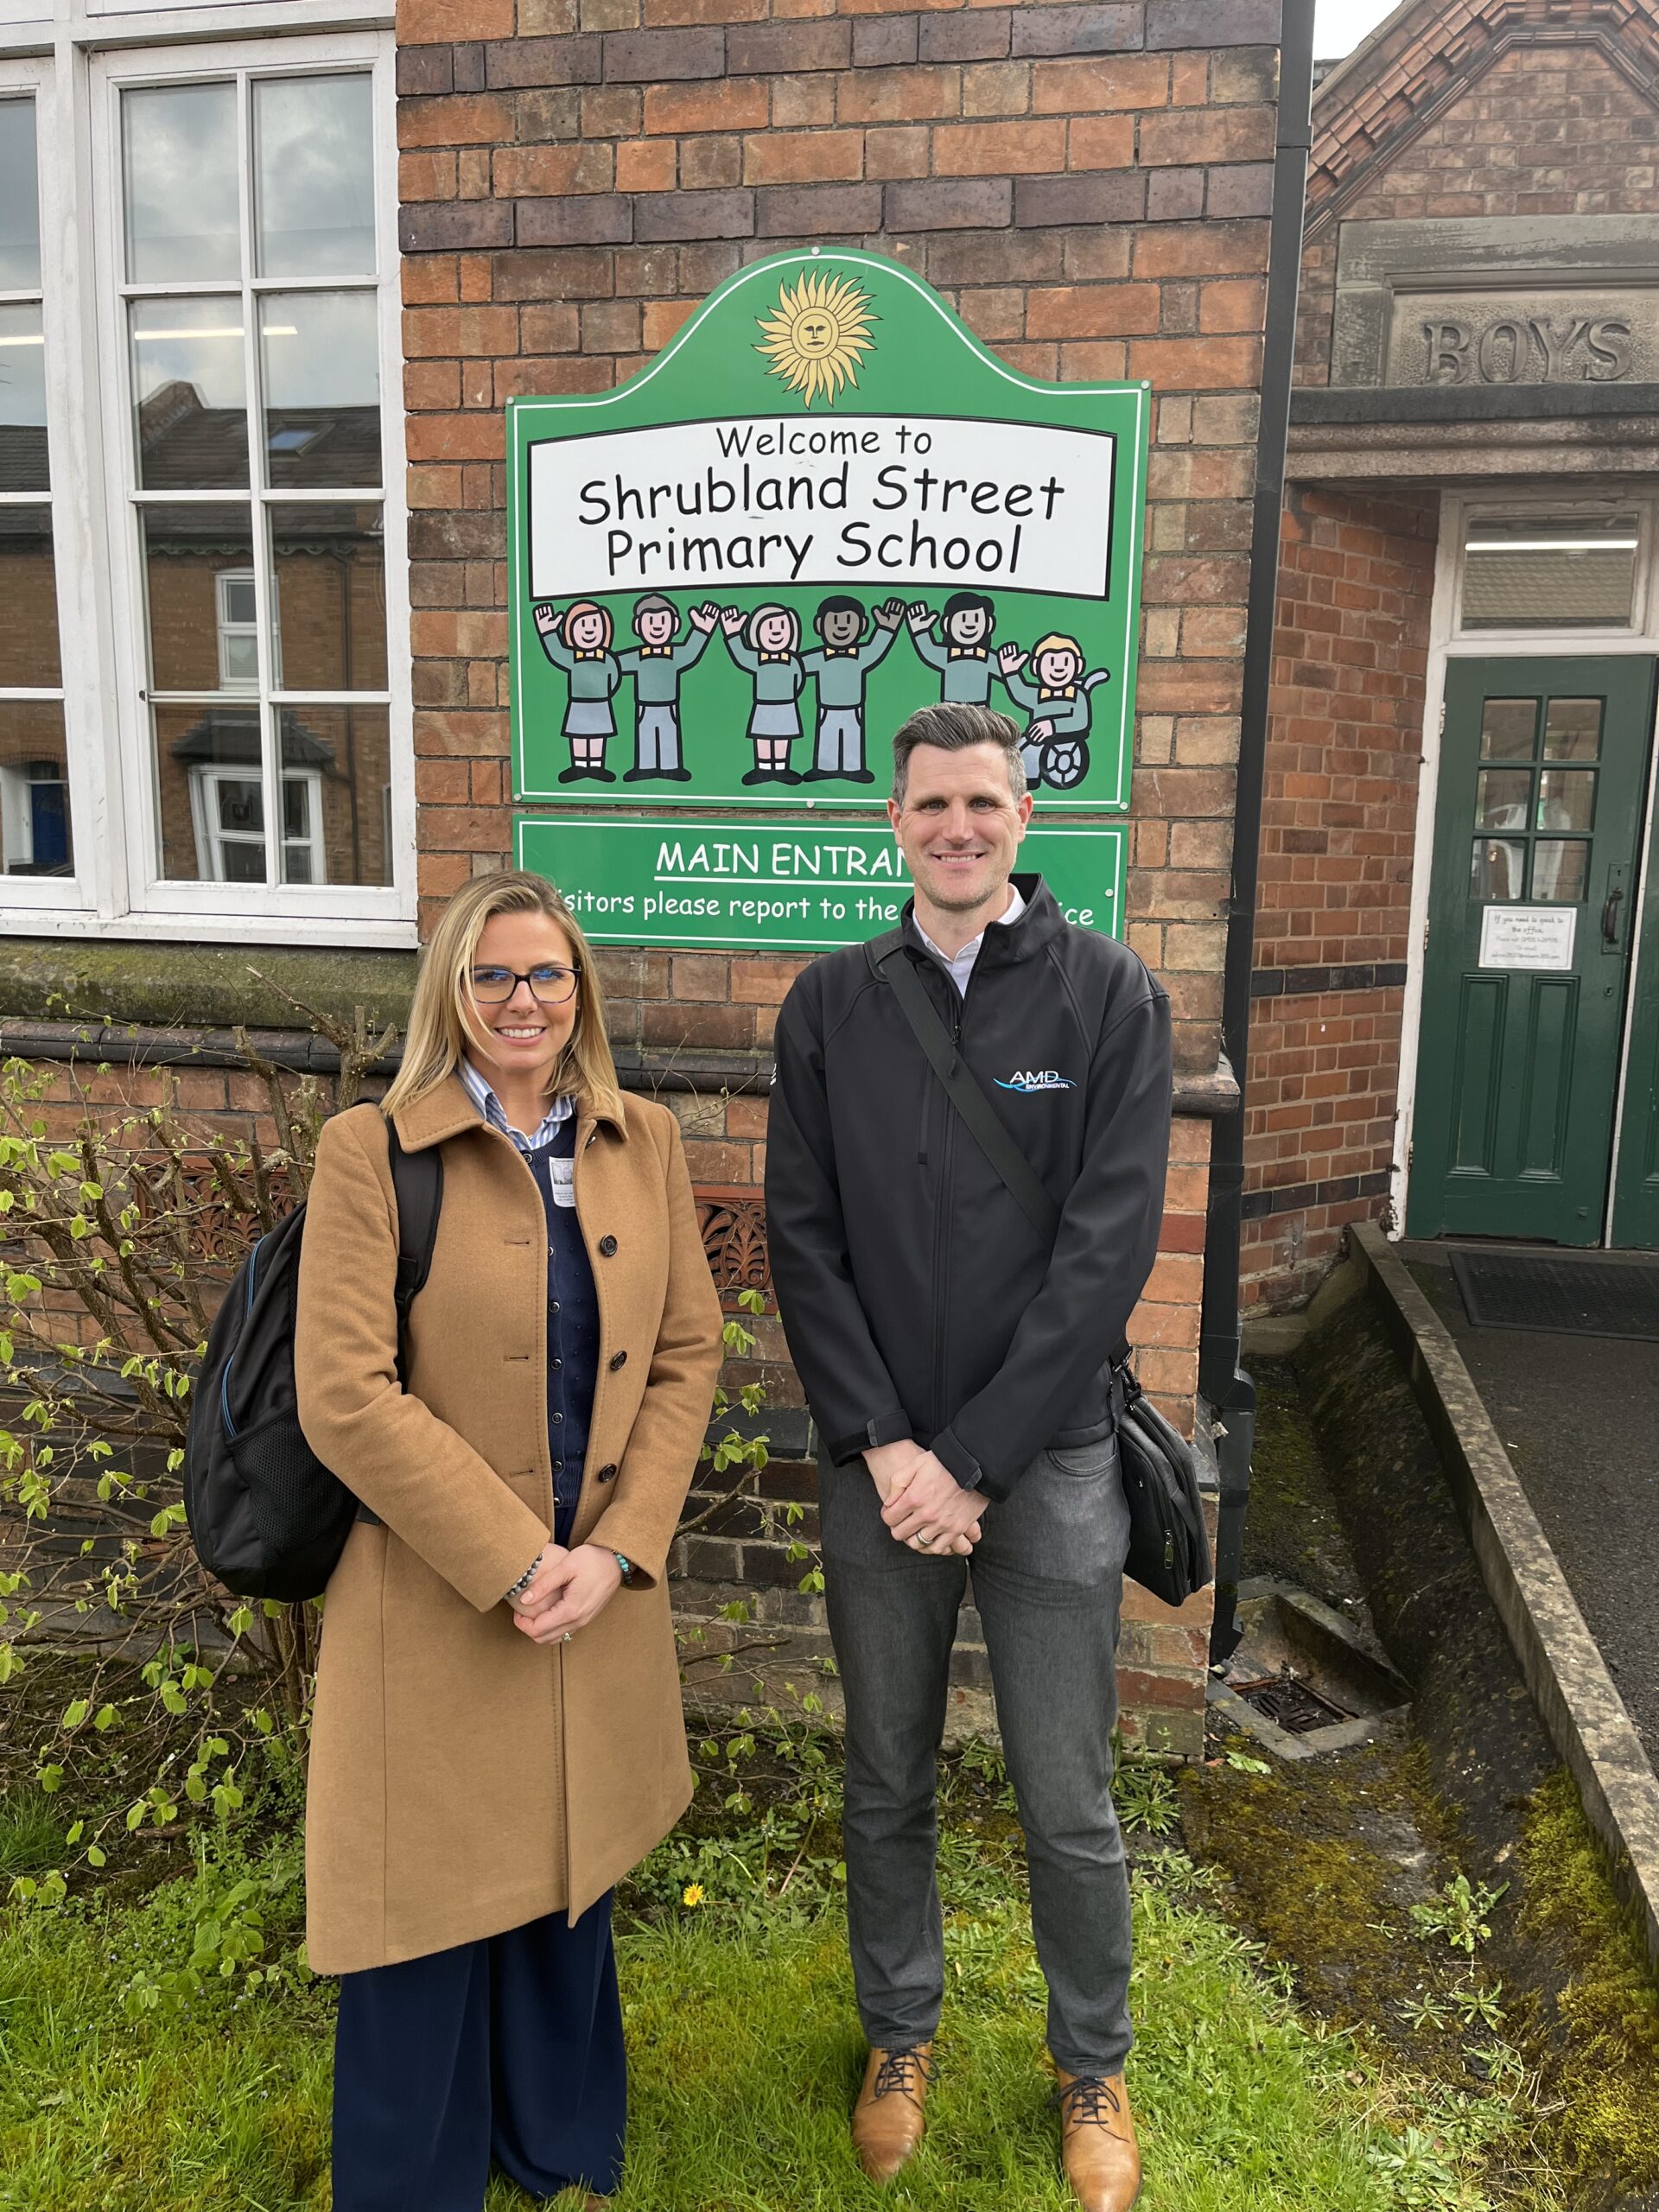 Career Talk - Knowledge to prepare children for future success. Rae Makepeace and Paul Shelswell from AMD Envrionmental at Shrubland Street  Community Primary School.